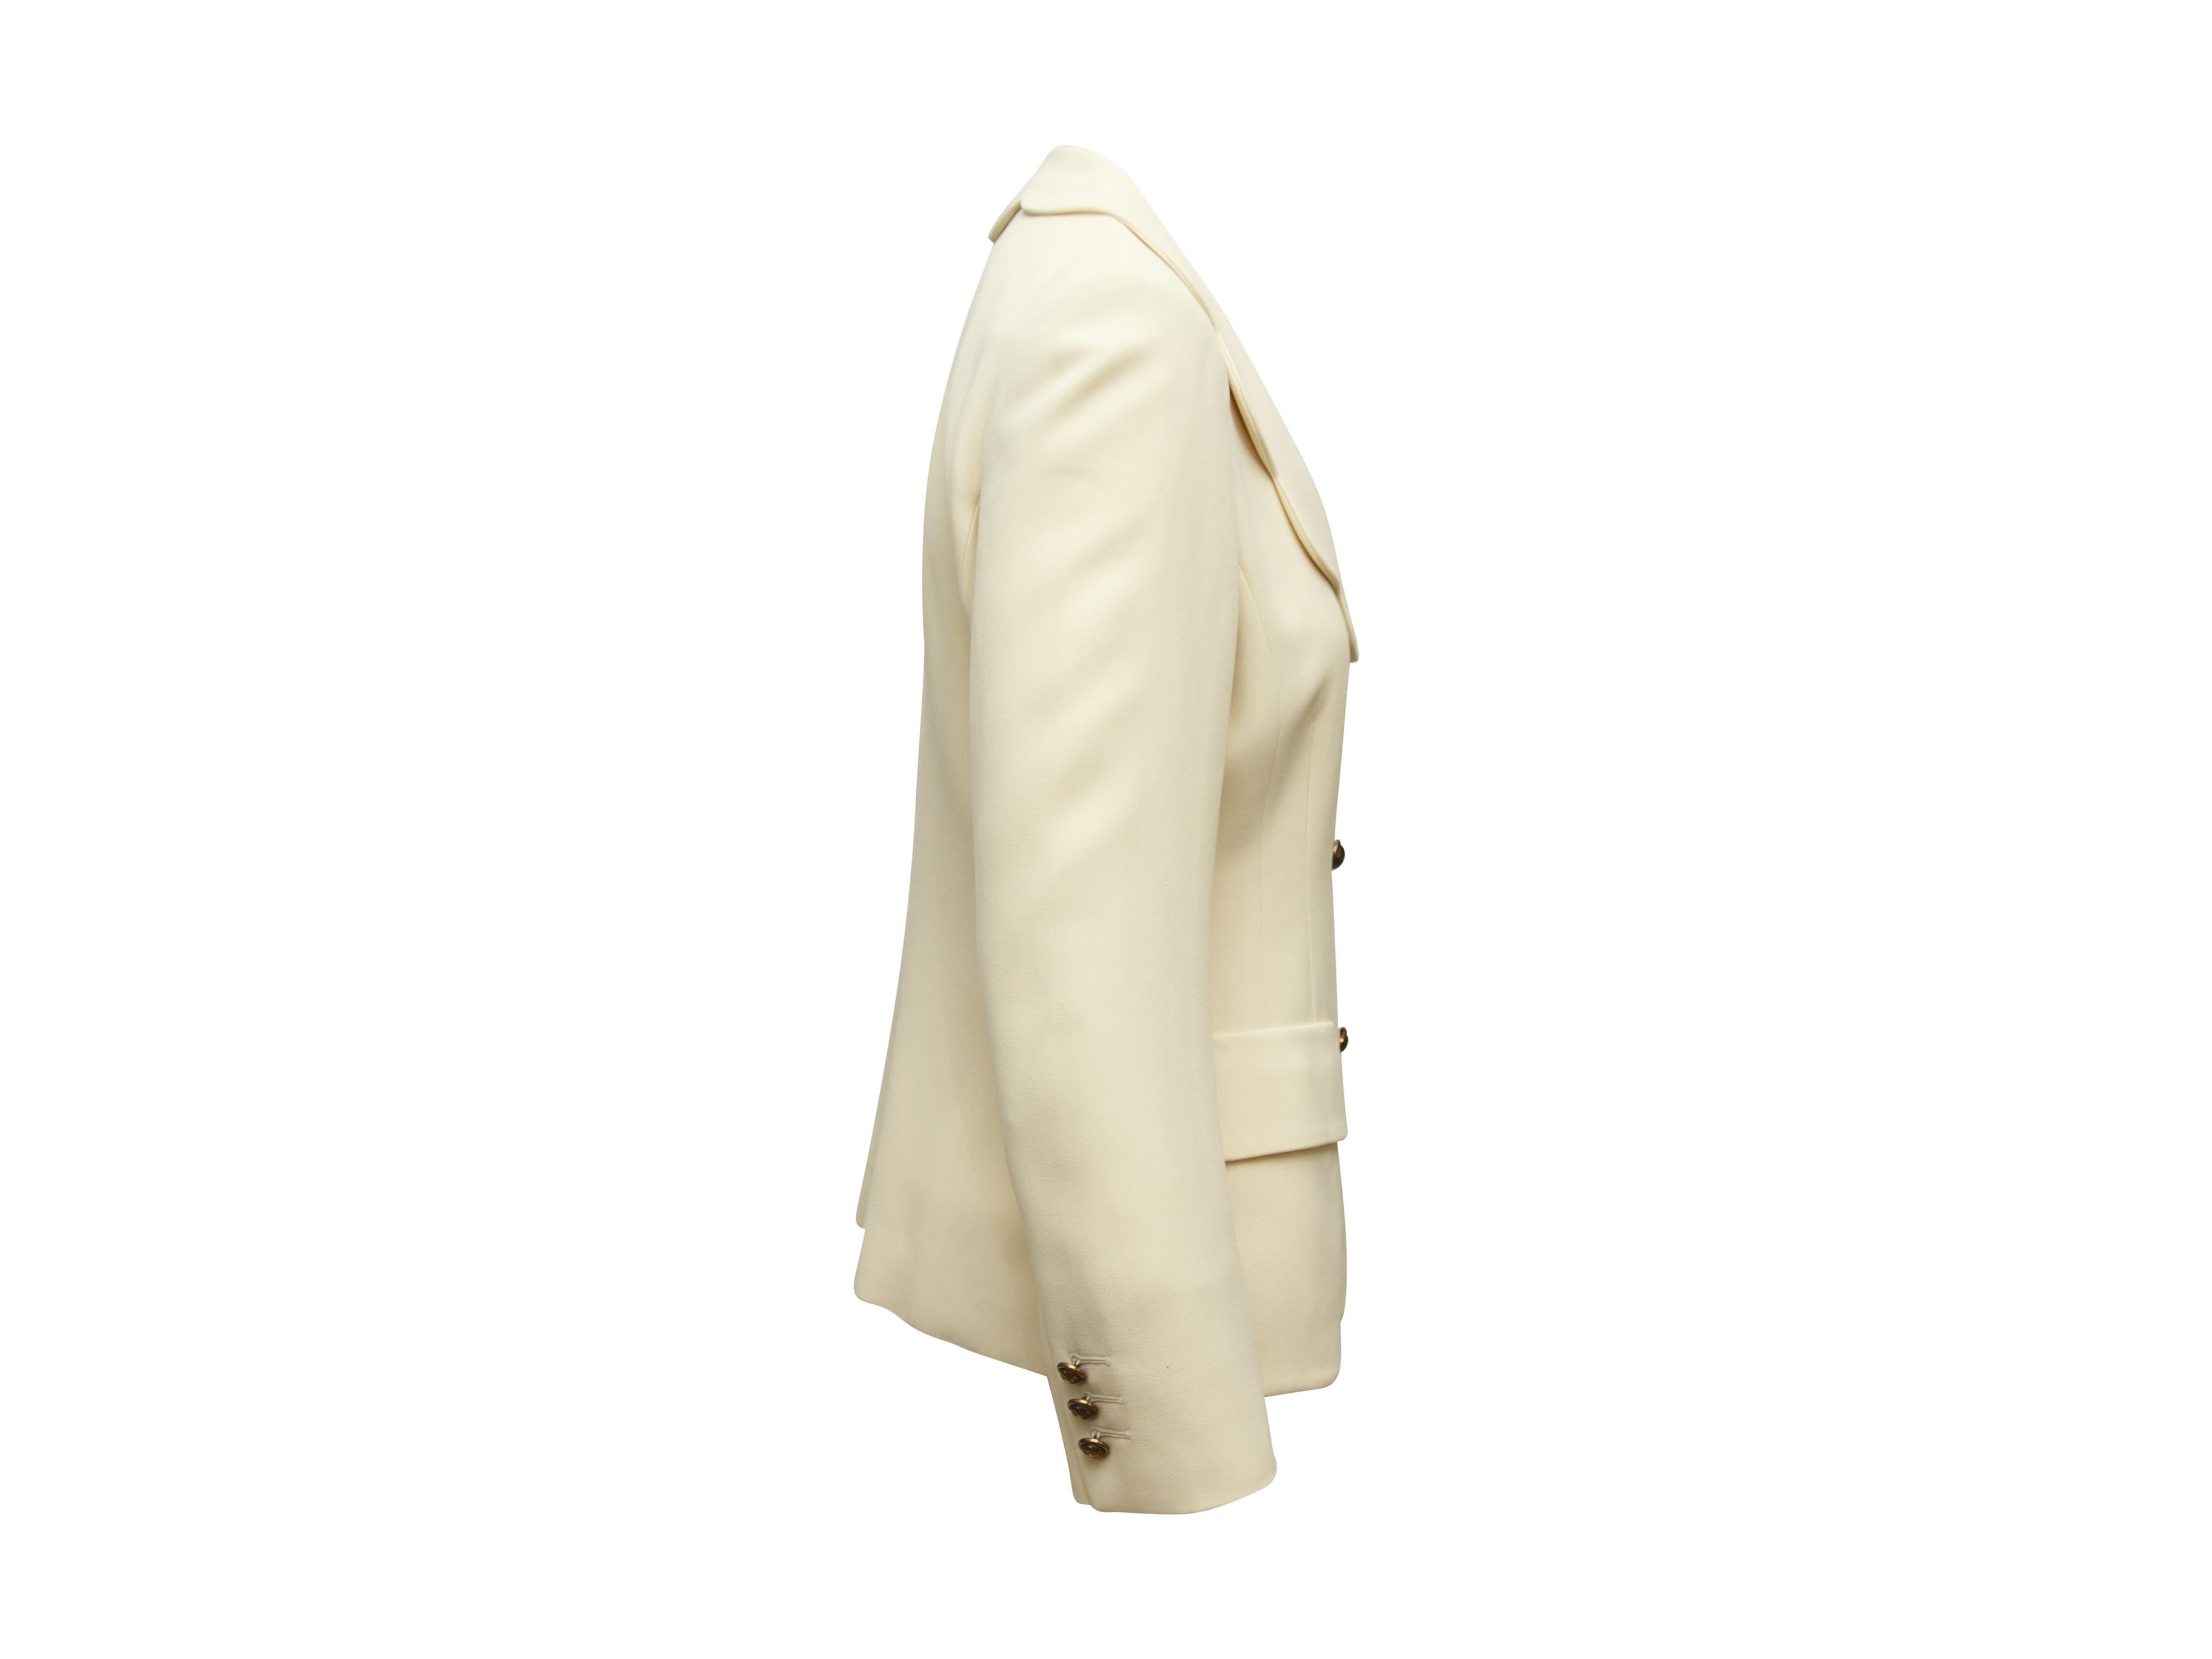 Product details:  Vintage cream scalloped jacket by Cheap and Chic by Moschino.  Scalloped lapel.  Long sleeves.  Three-button detail at cuffs.  Button-front closure.  Waist flap pockets.  28